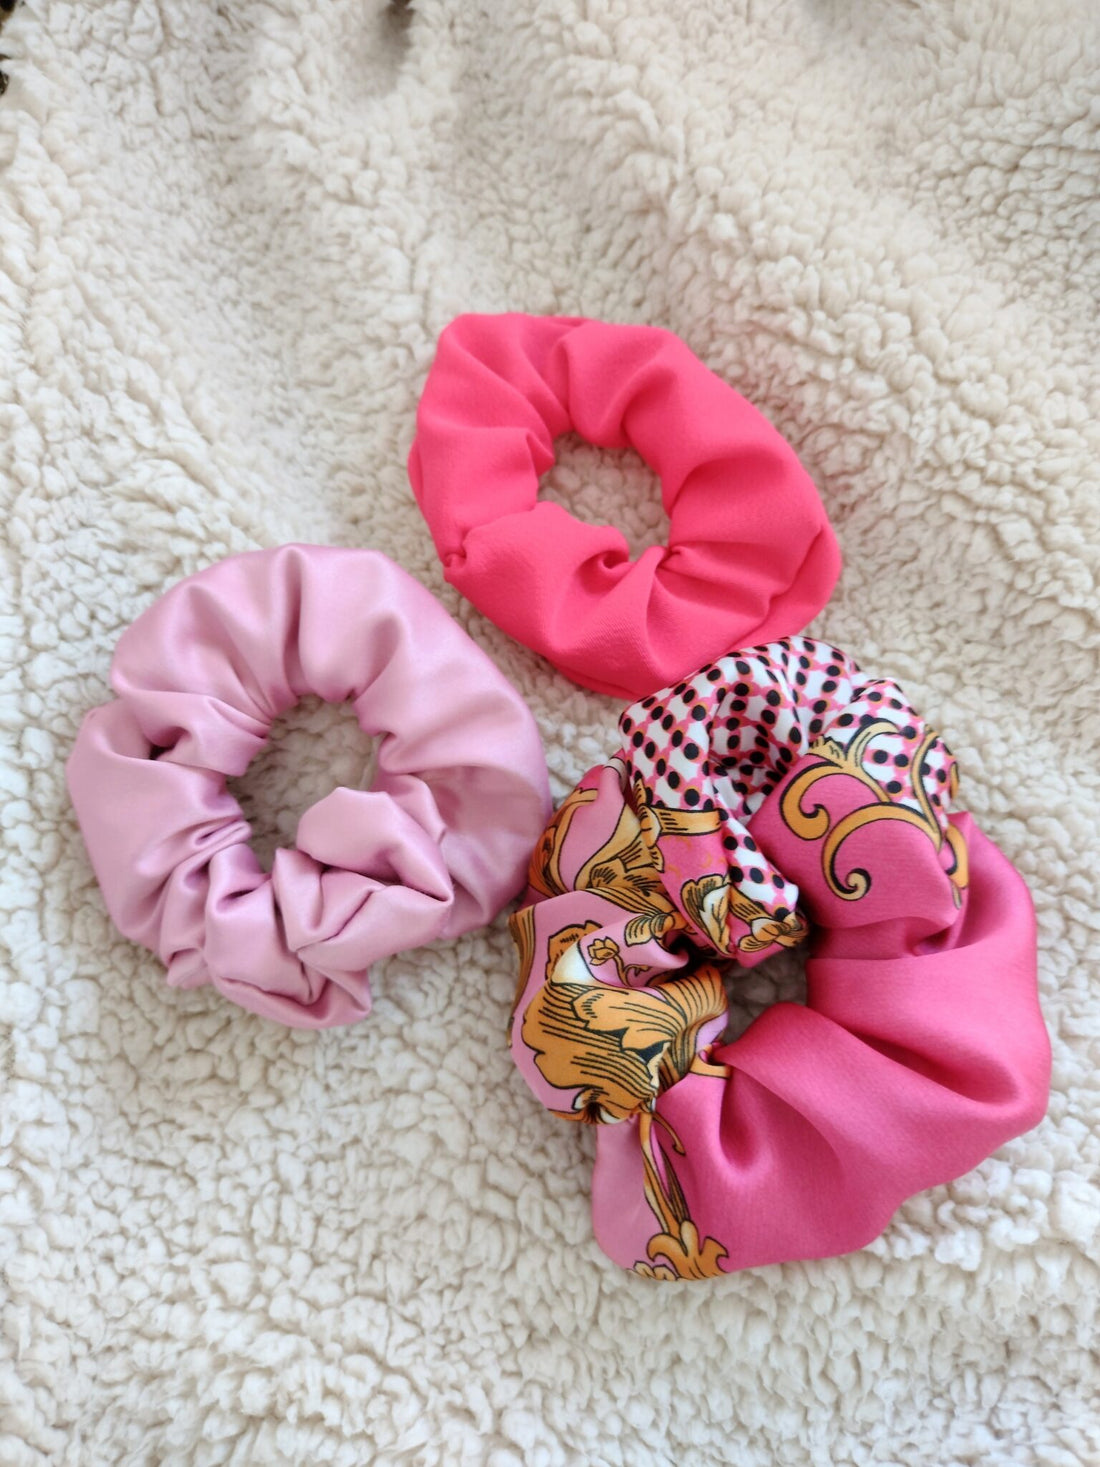 8 Ways to Wear a Scrunchie in 2022 and Beyond